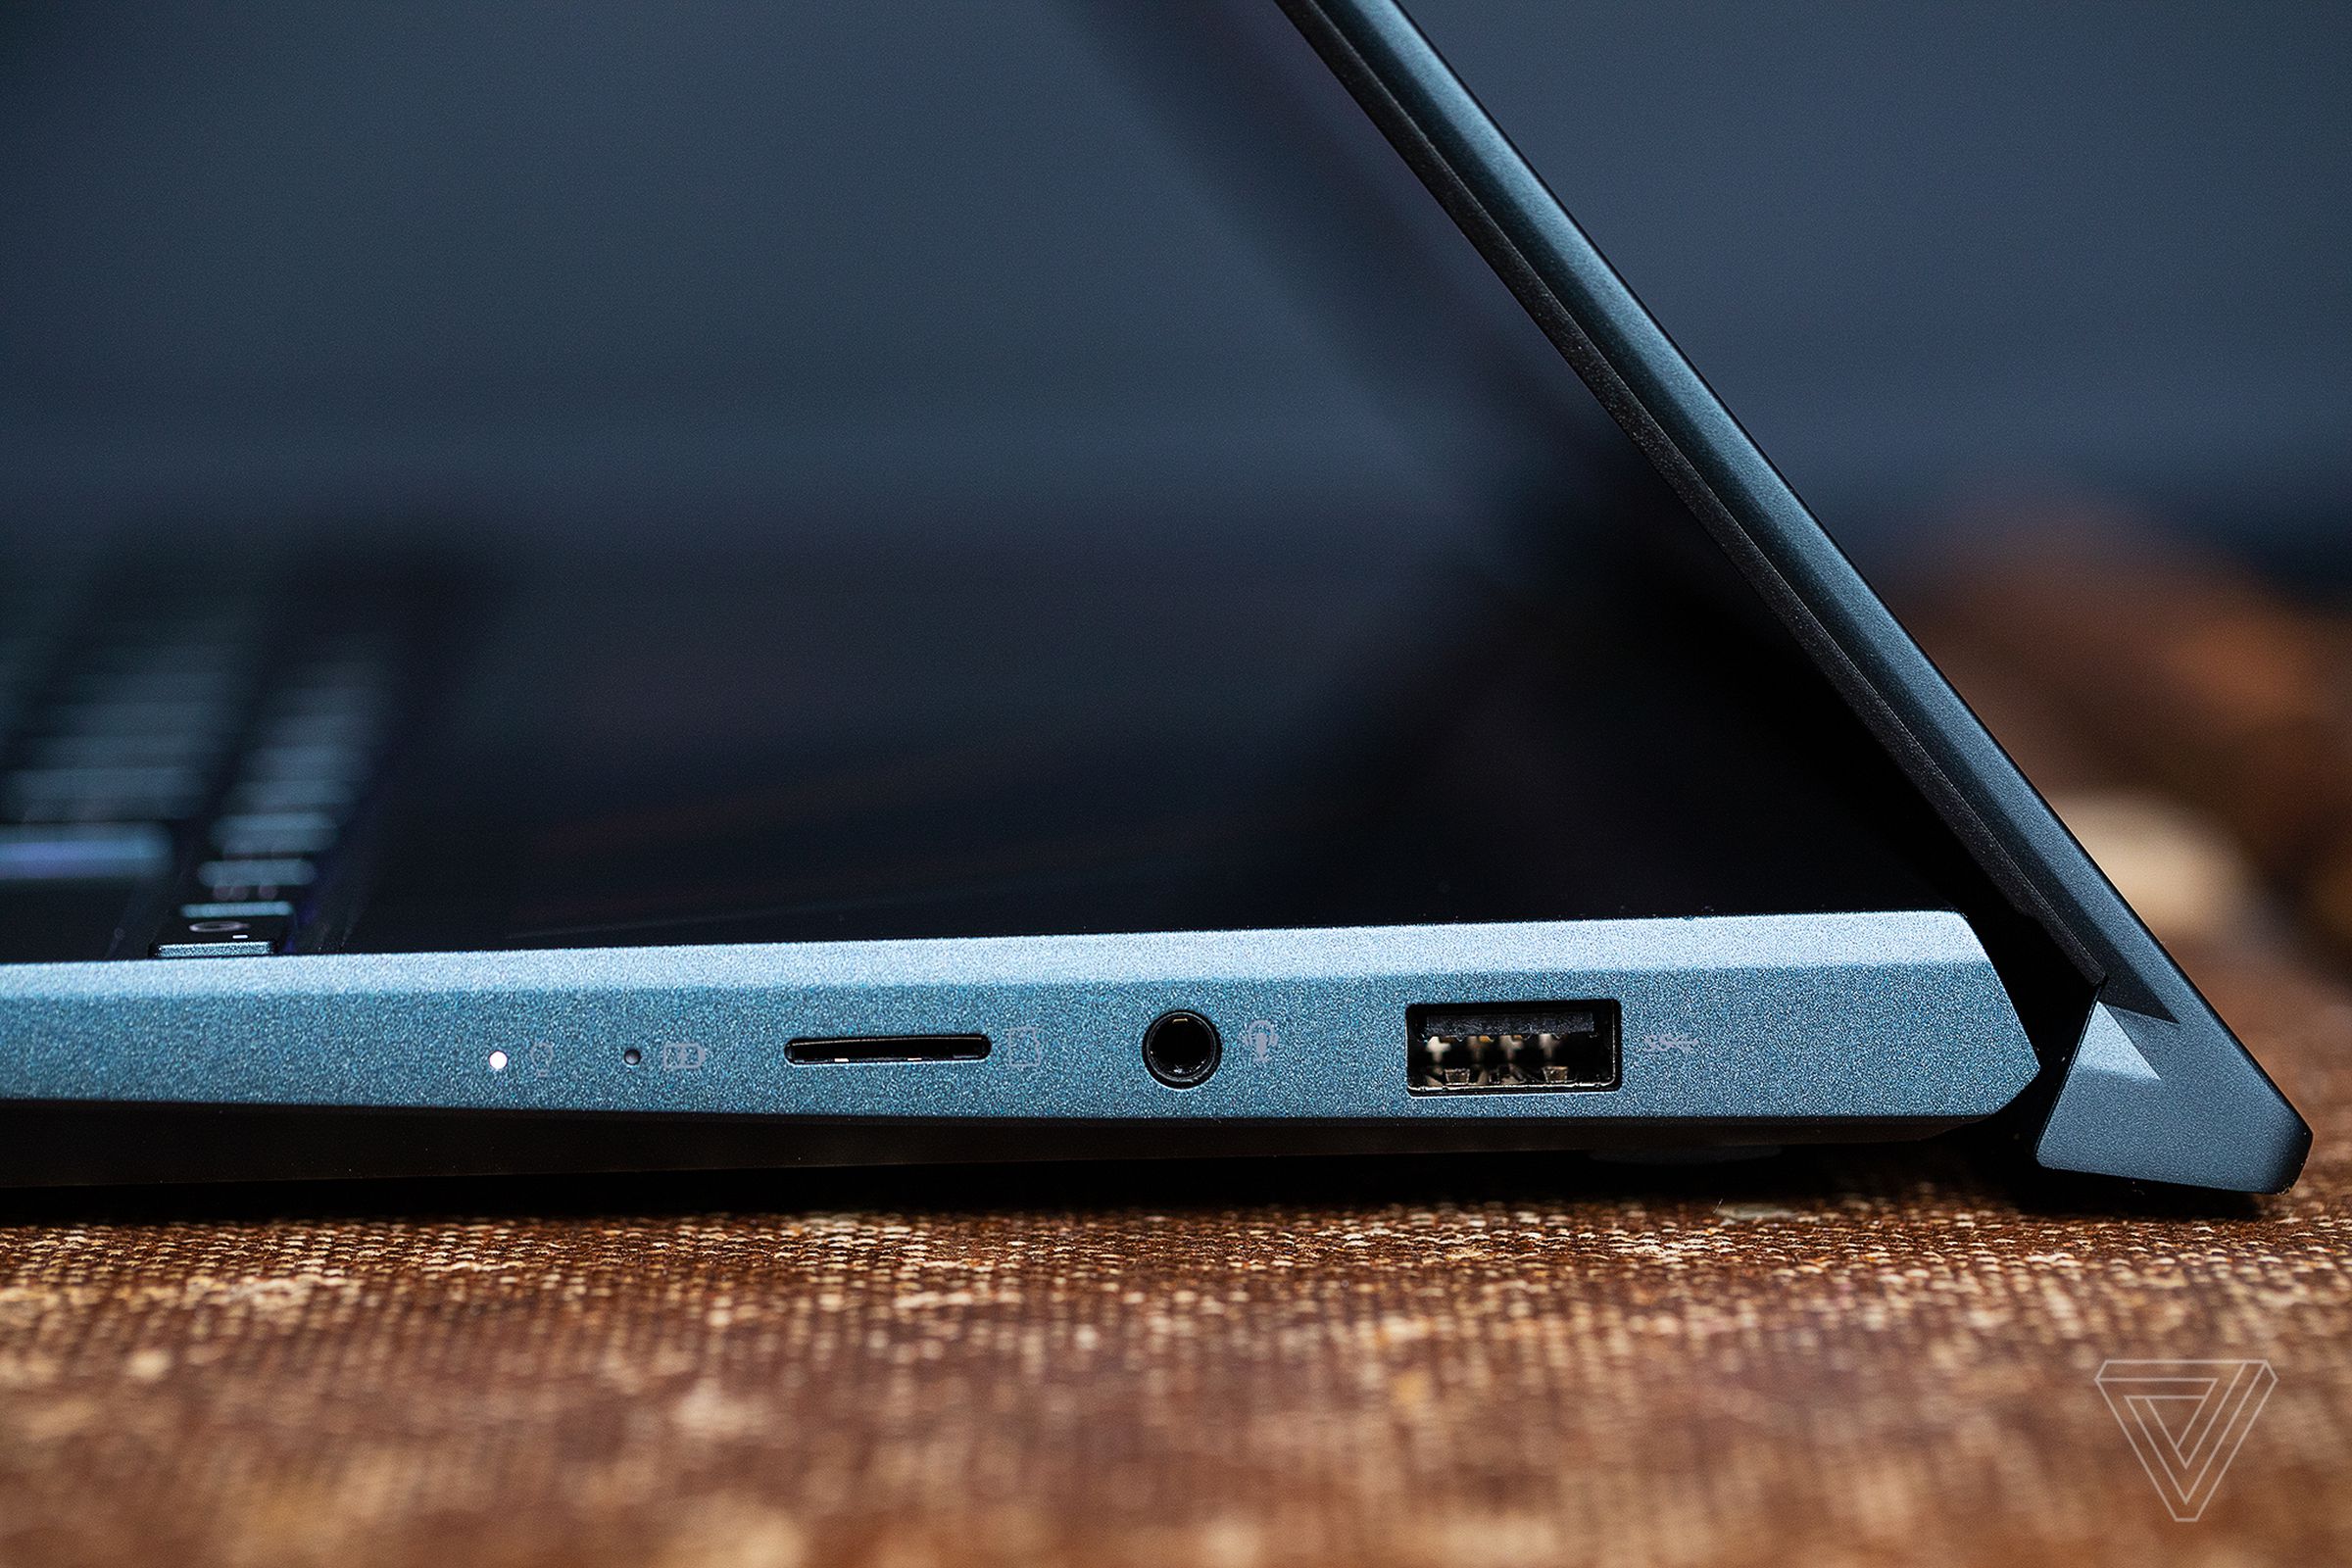 Asus Zenbook Duo right-side ports